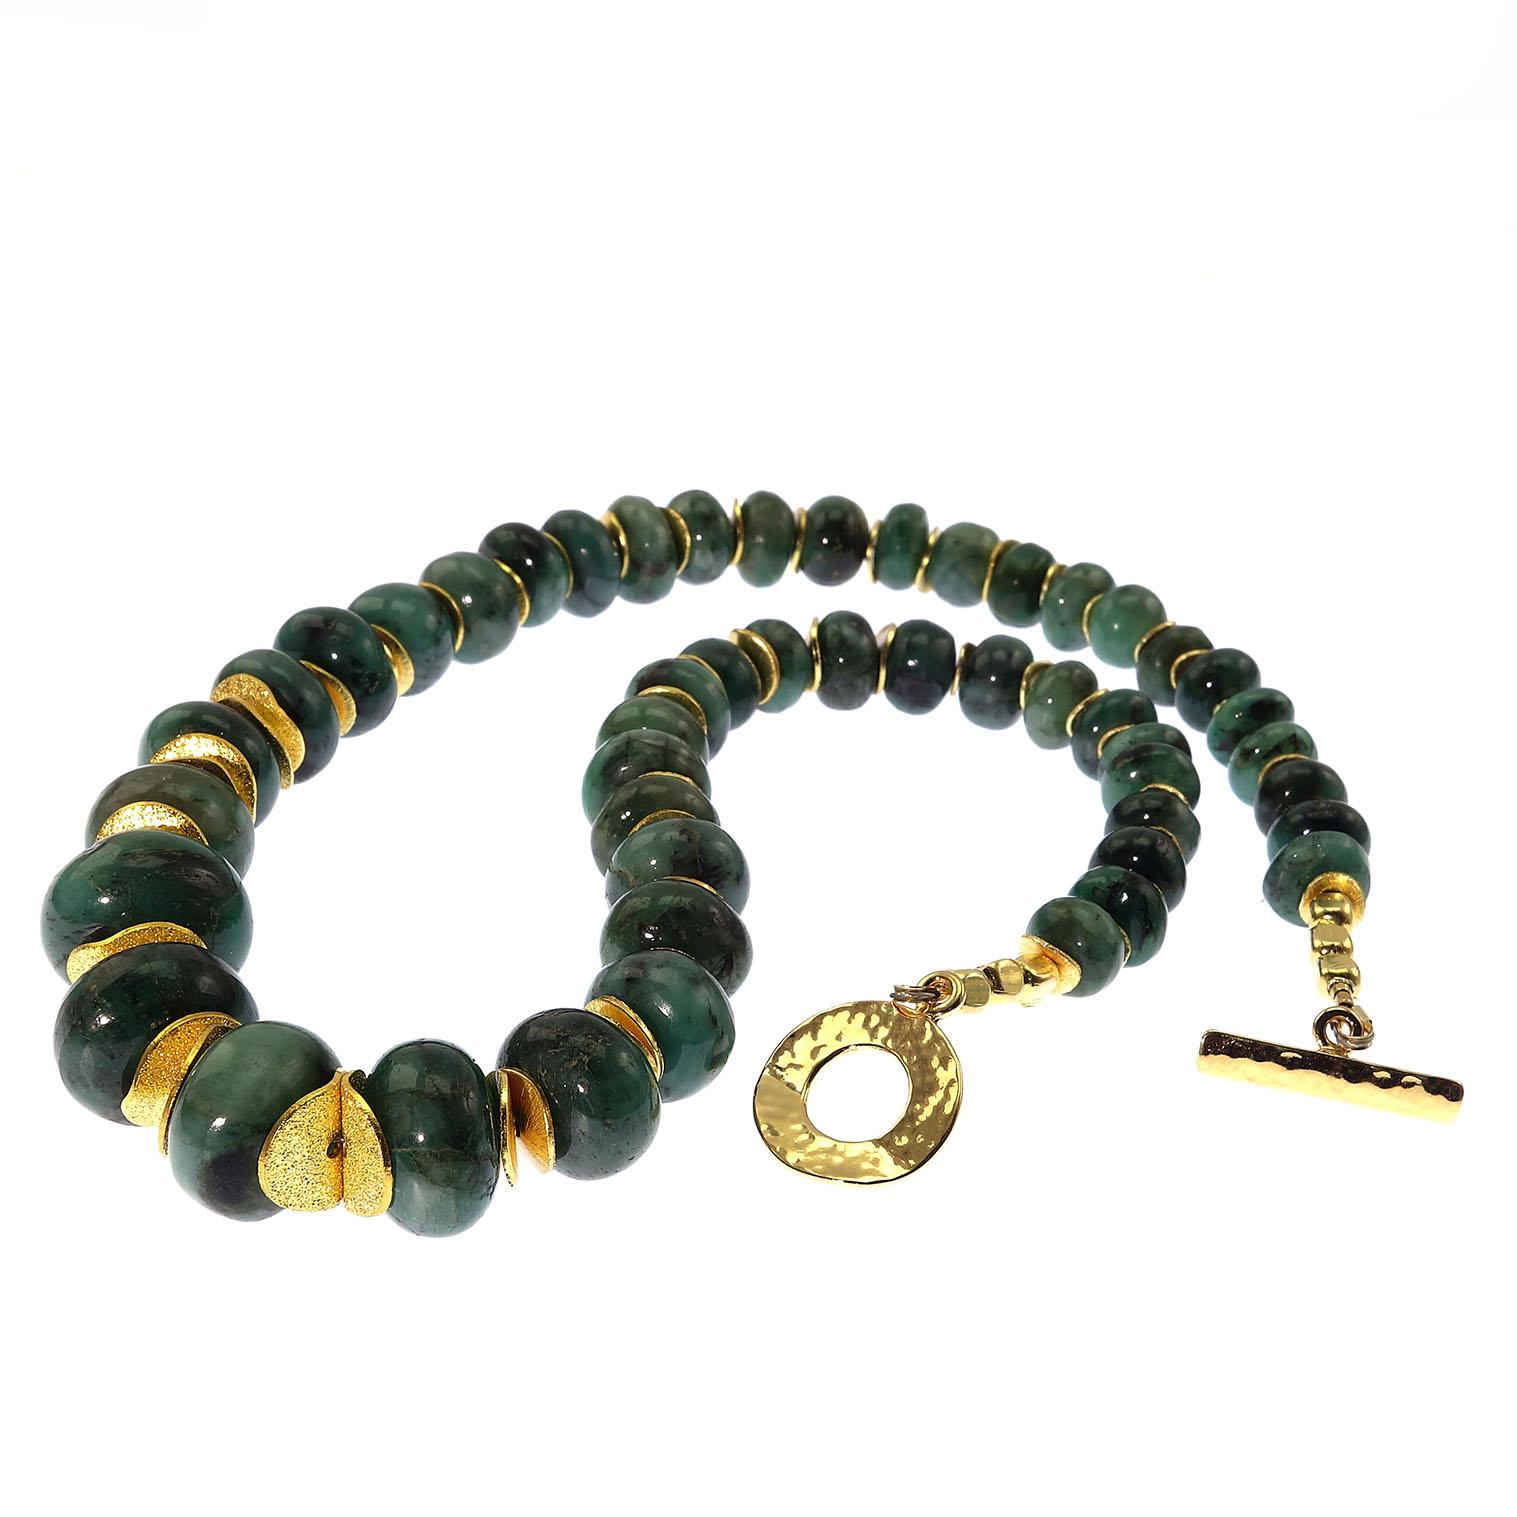  Necklace of Highly Polished Graduated  Green Emerald Rondels with Gold Accents 1